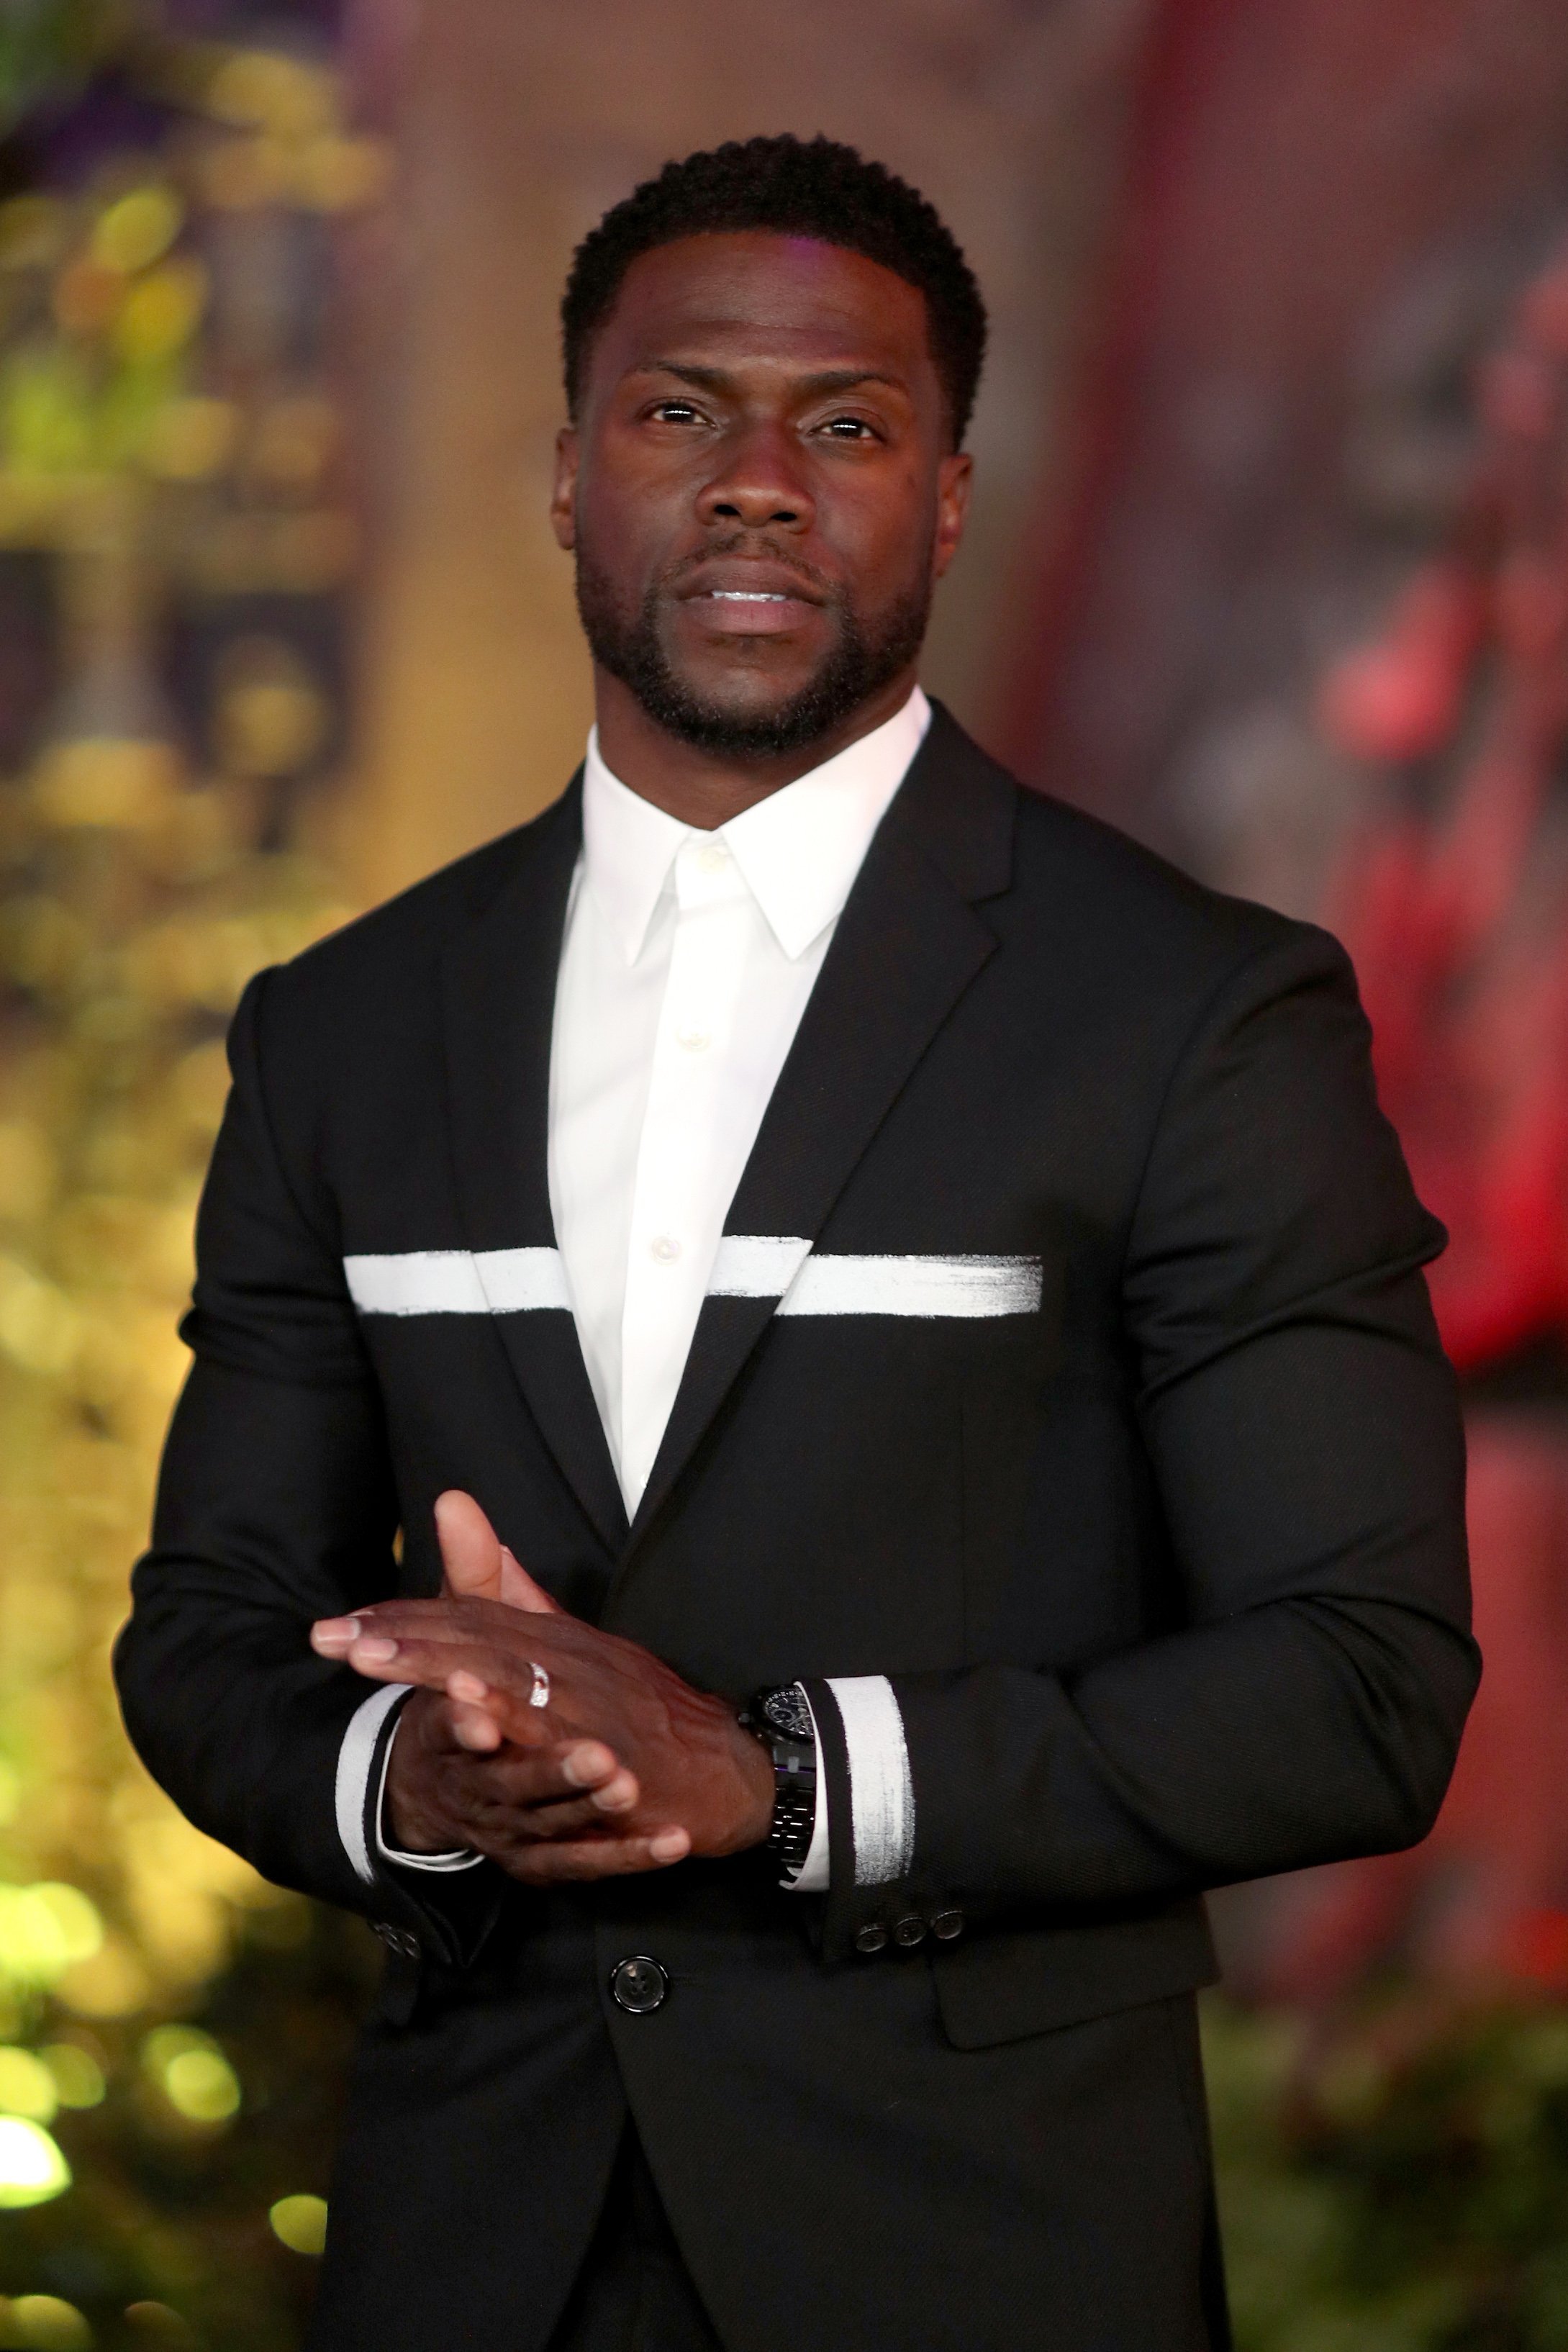 Kevin Hart attends the premiere of Columbia Pictures' "Jumanji: Welcome To The Jungle" on December 11, 2017, in Hollywood, California. | Source: Getty Images.